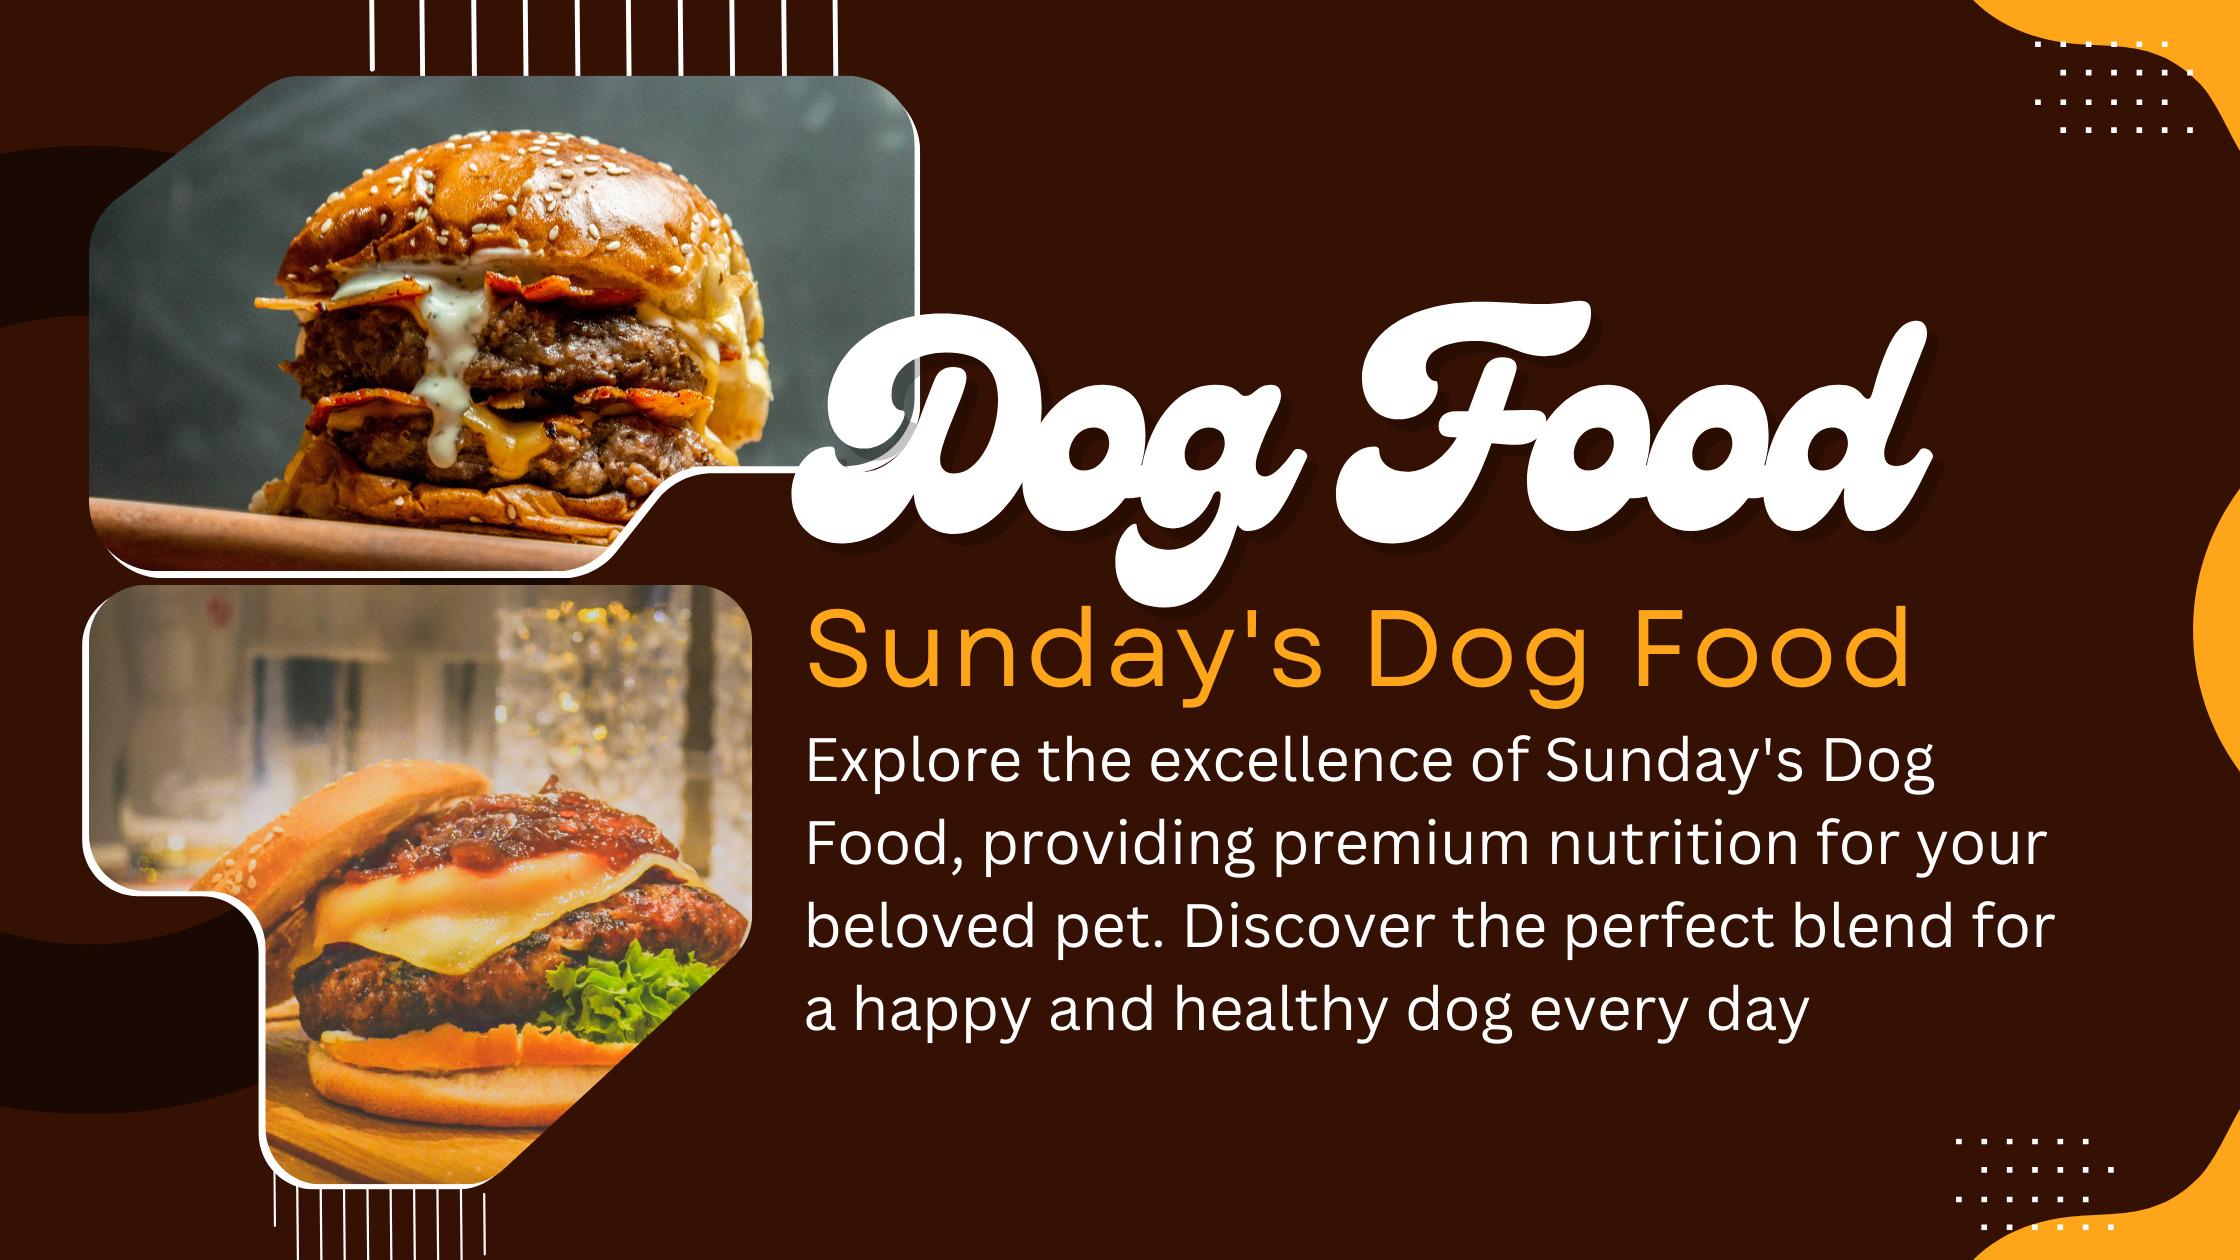 Explore the excellence of Sunday's Dog Food, providing premium nutrition for your beloved pet. Discover the perfect blend for a happy and healthy dog every day